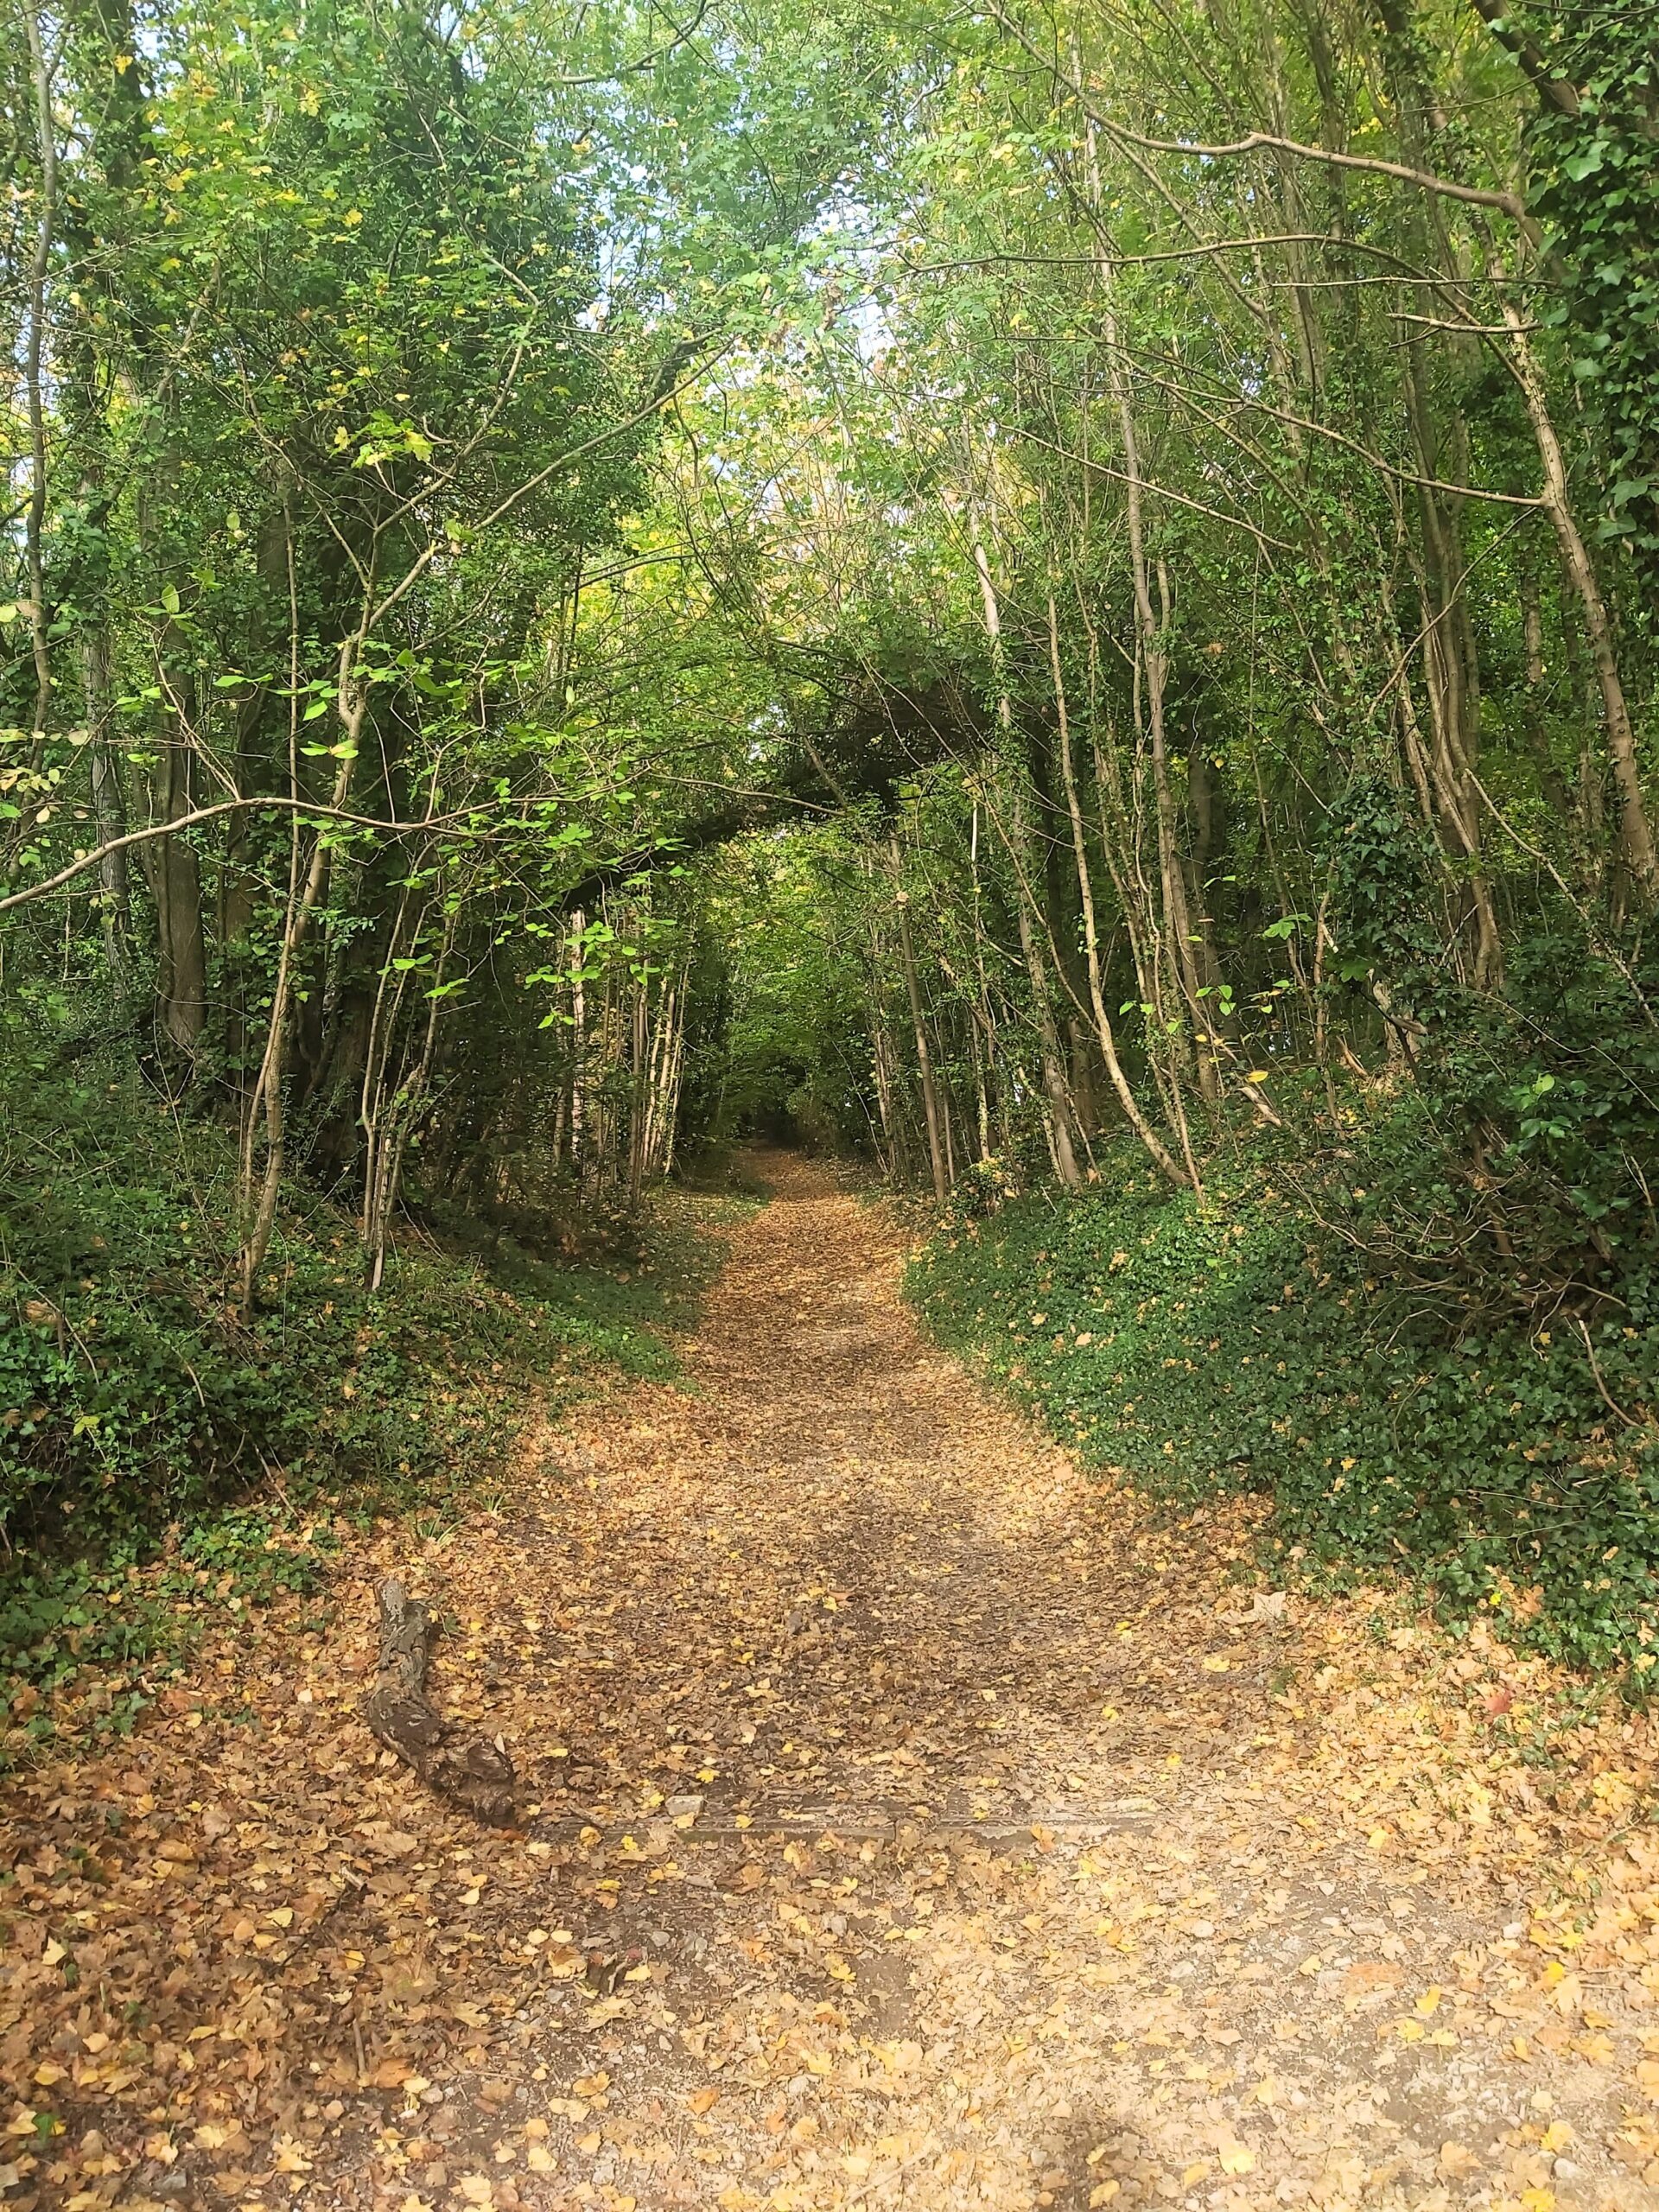 The wooded walkway to Kit's Coty at Aylesford, Kent, England.